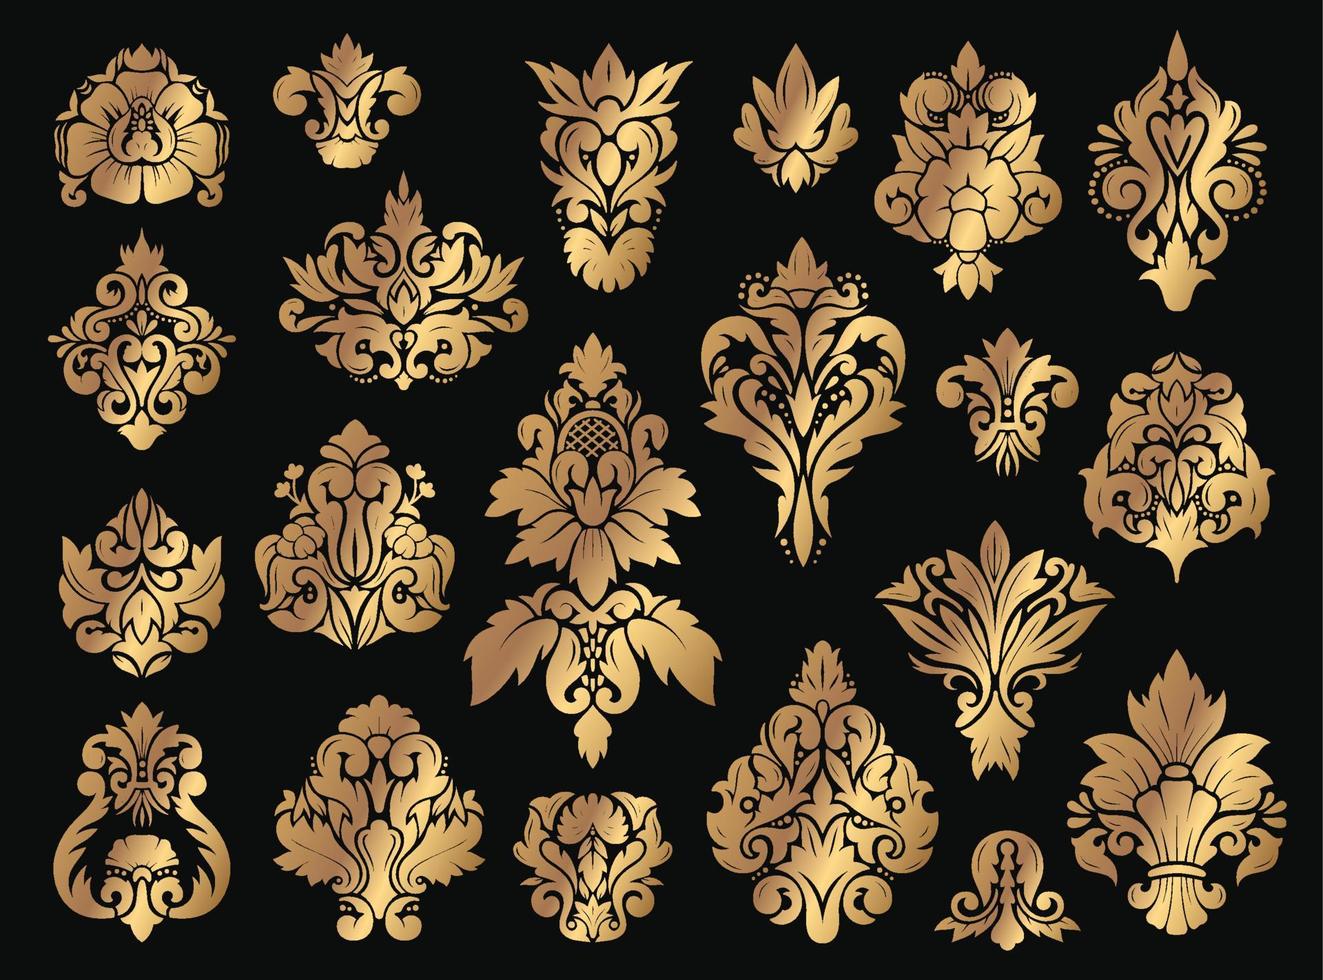 Damask floral ornament. Gold vintage ornaments with flourish elements. Old fashioned baroque decorations for wallpaper or packaging vector set